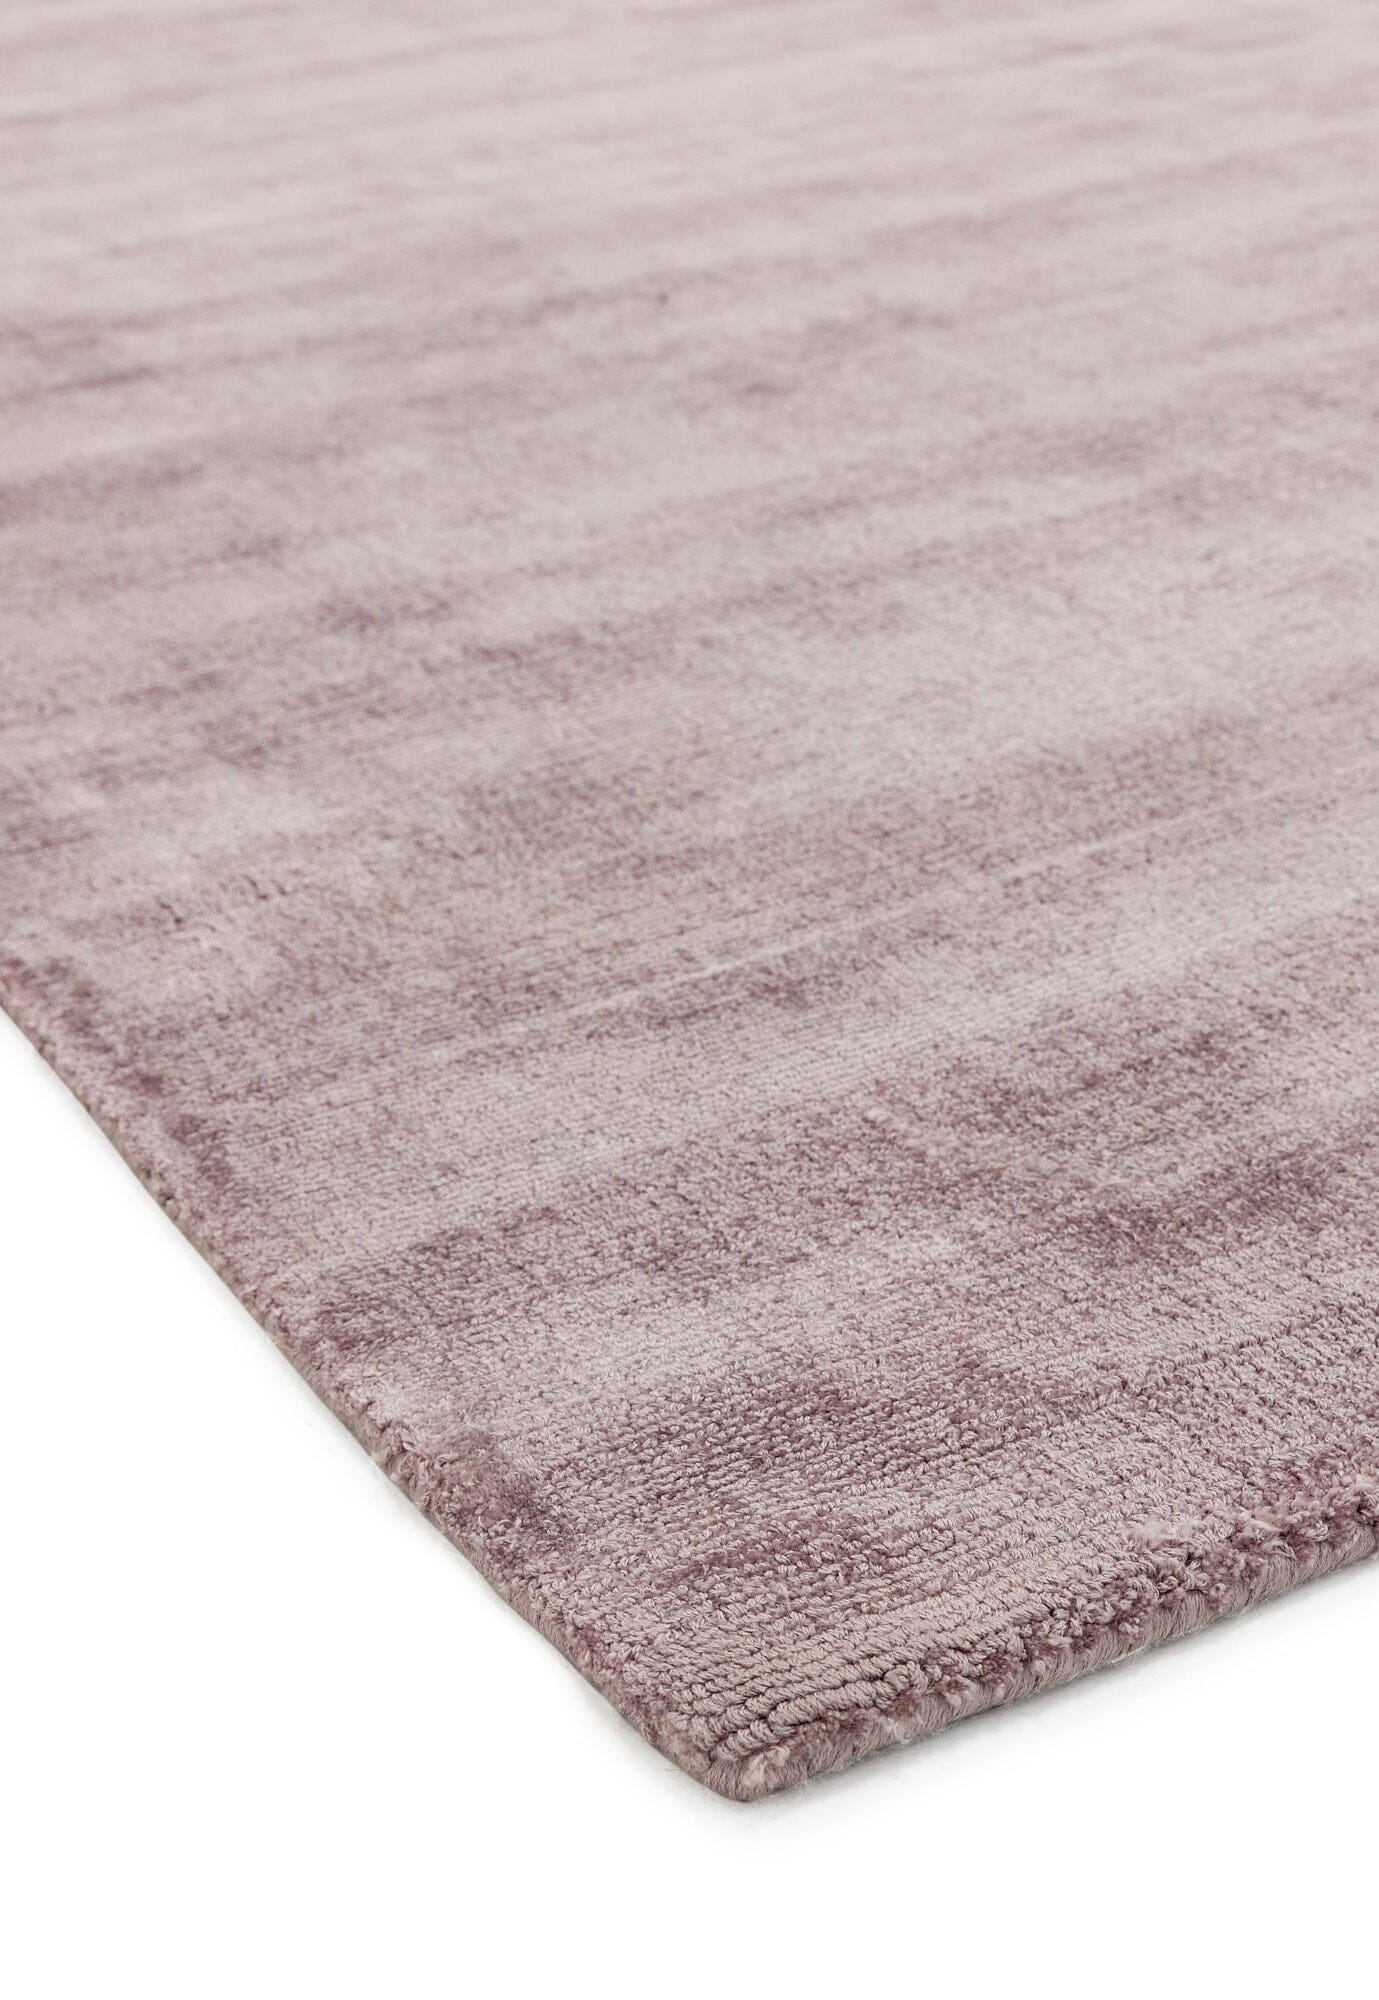 Asiatic Carpets Blade Hand Woven Rug Heather - 120 x 170cm